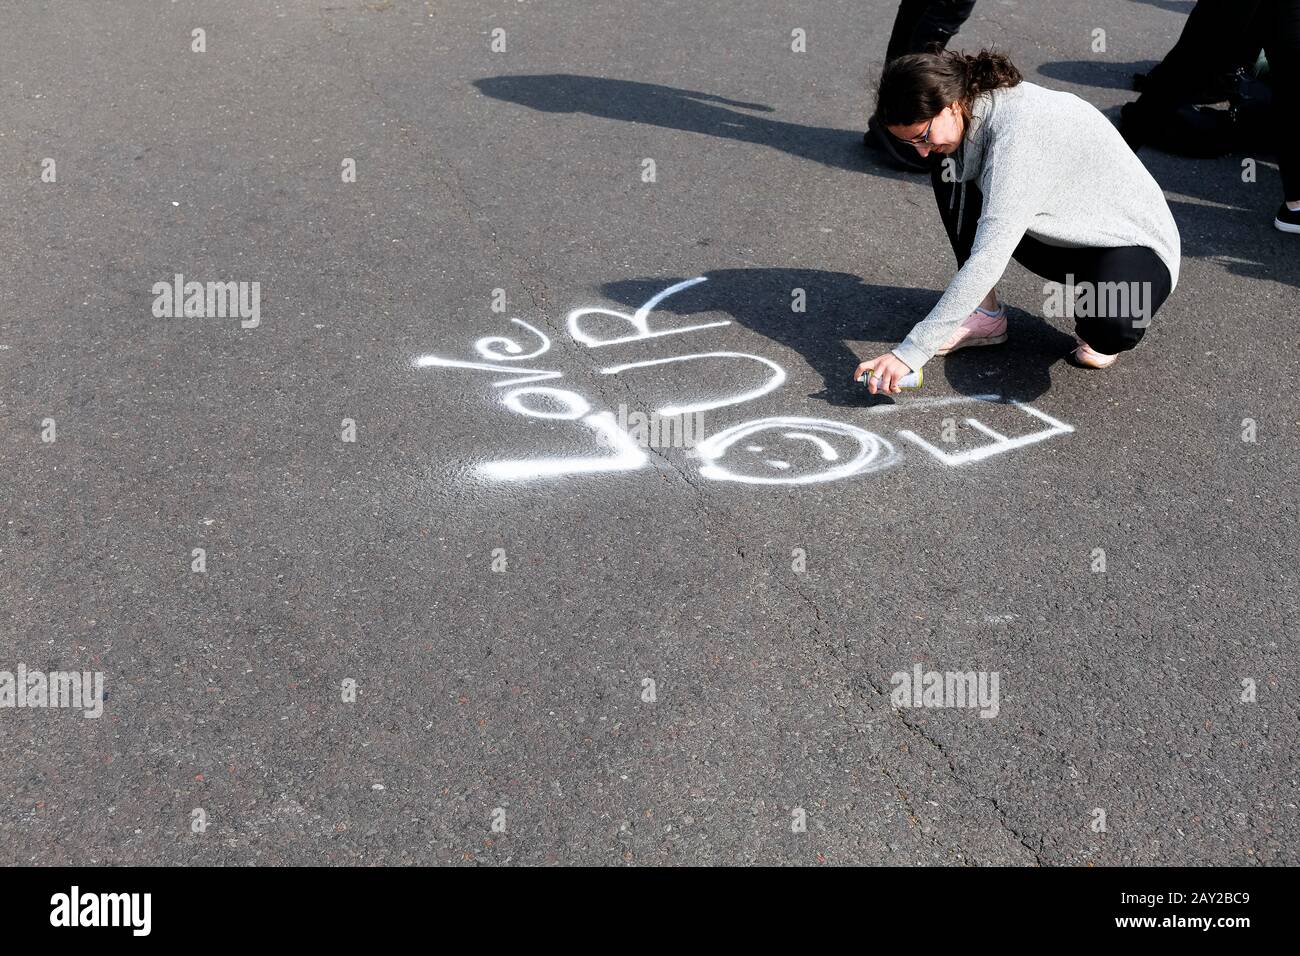 London, UK. A female protester uses white spray paint in the middle of the road as London comes to a standstill as protesters with the Extinction Rebe Stock Photo